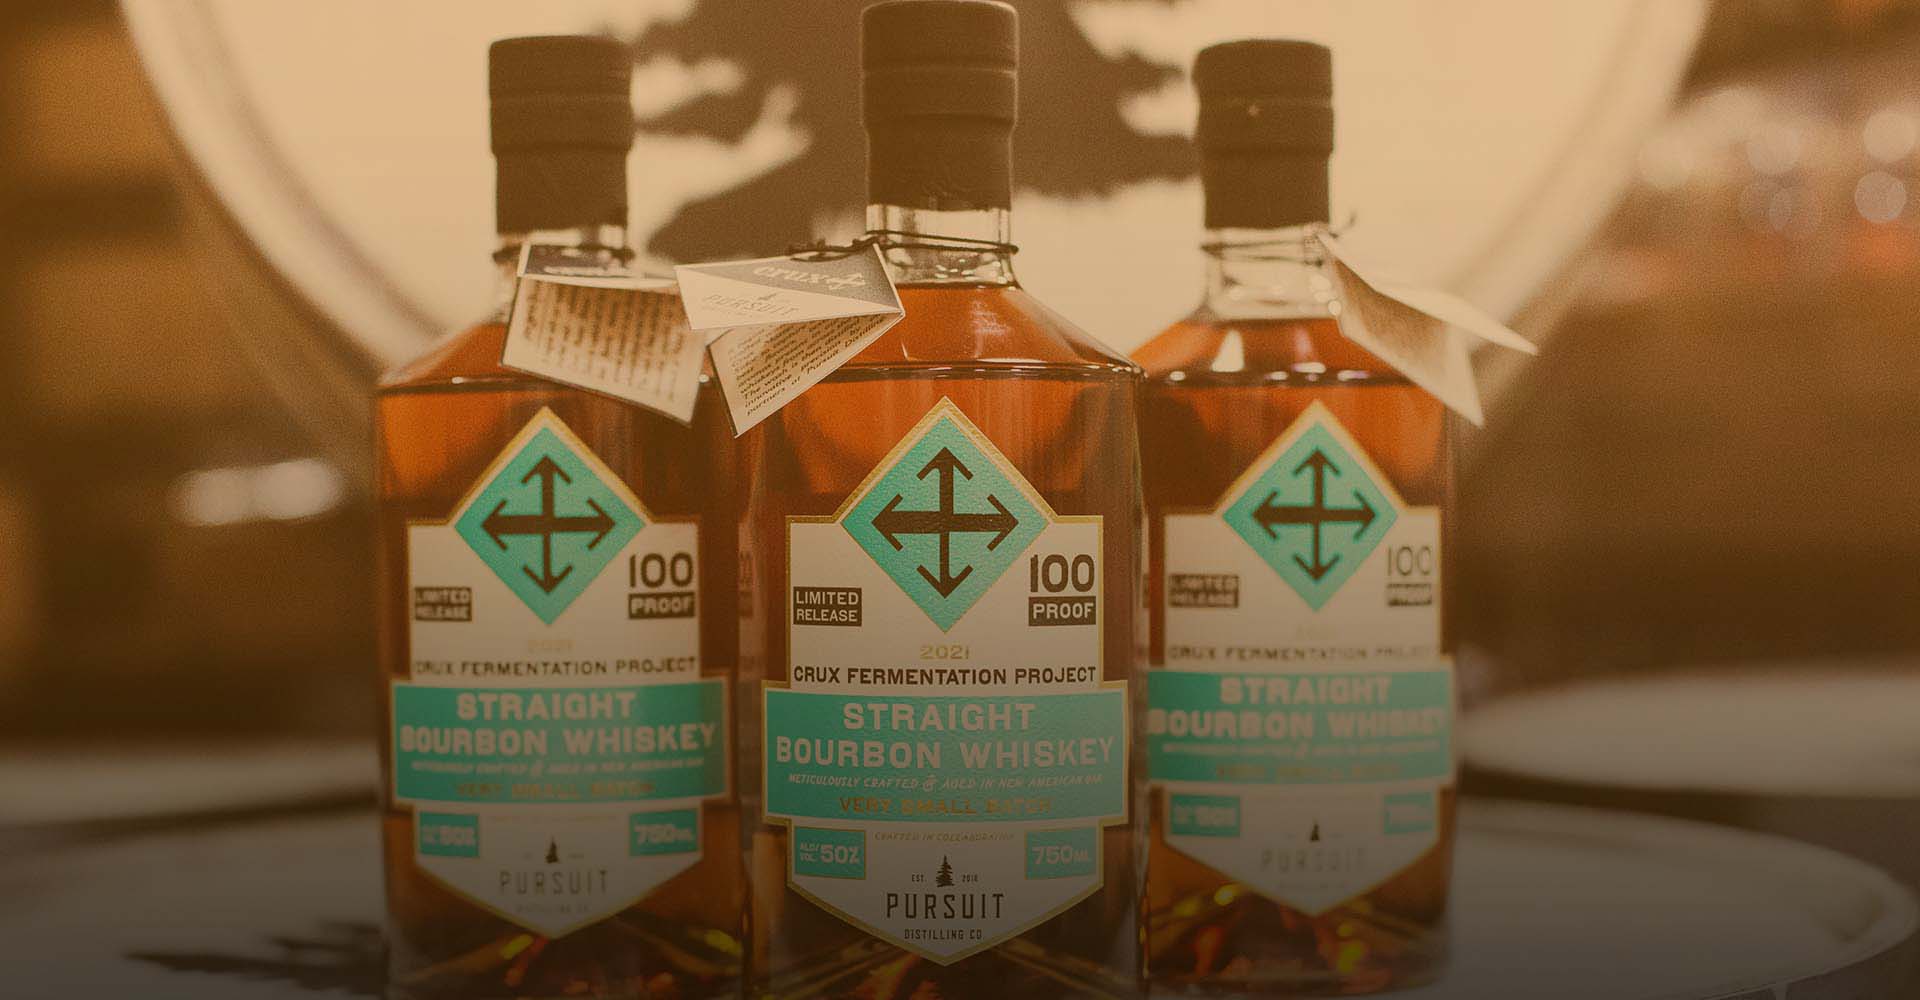 Introducing: Our First Whiskey!